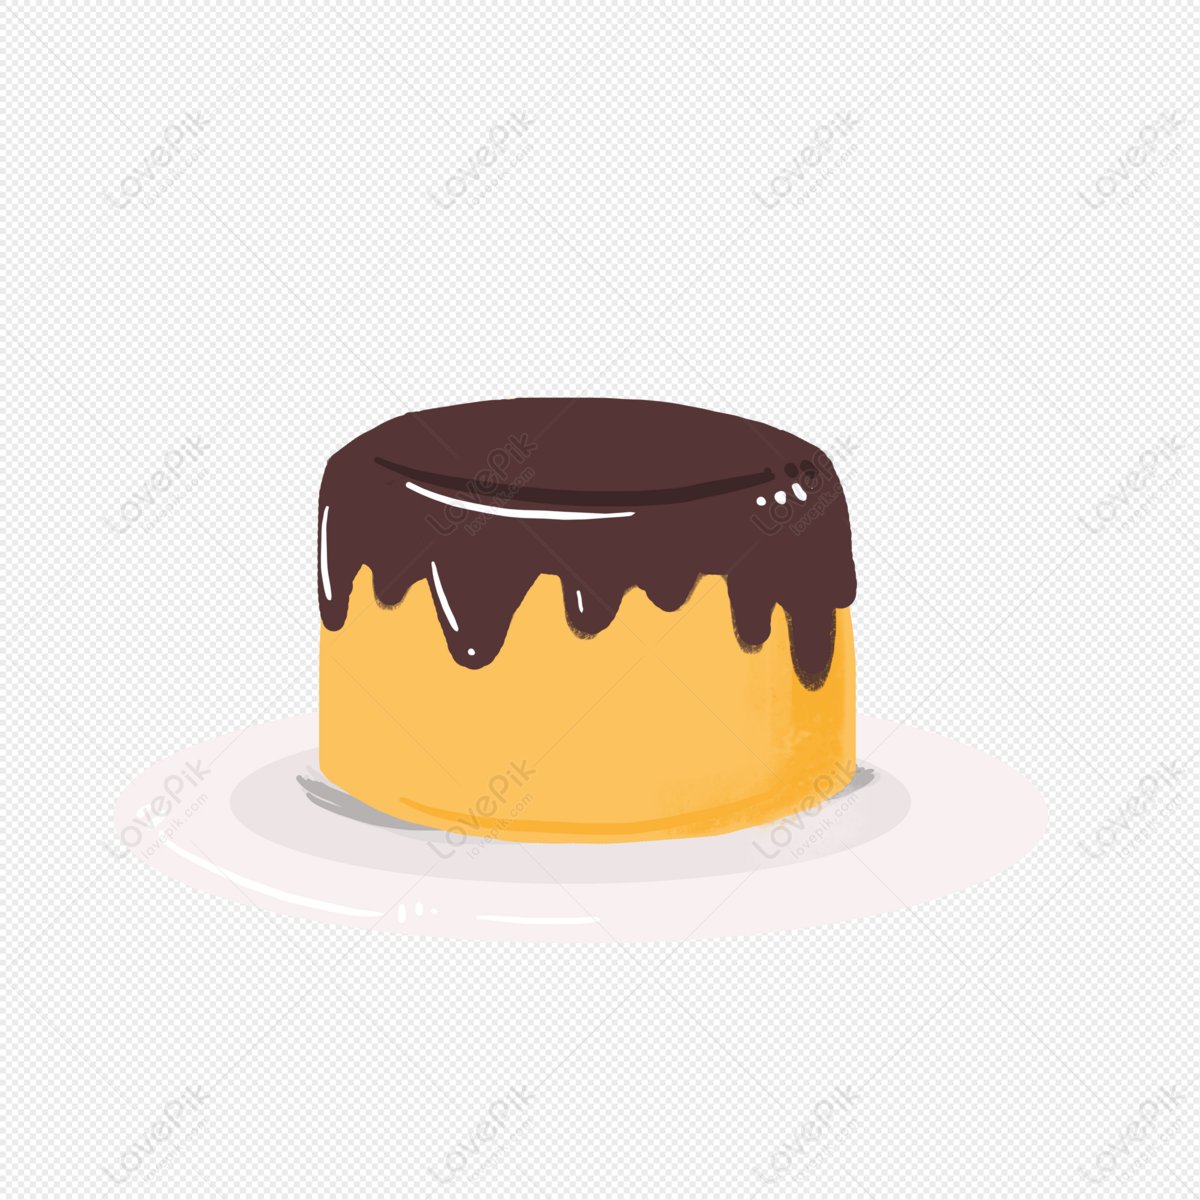 Pudding Dessert Food Gourmet Cartoon Free PNG And Clipart Image For Free  Download - Lovepik | 401102019